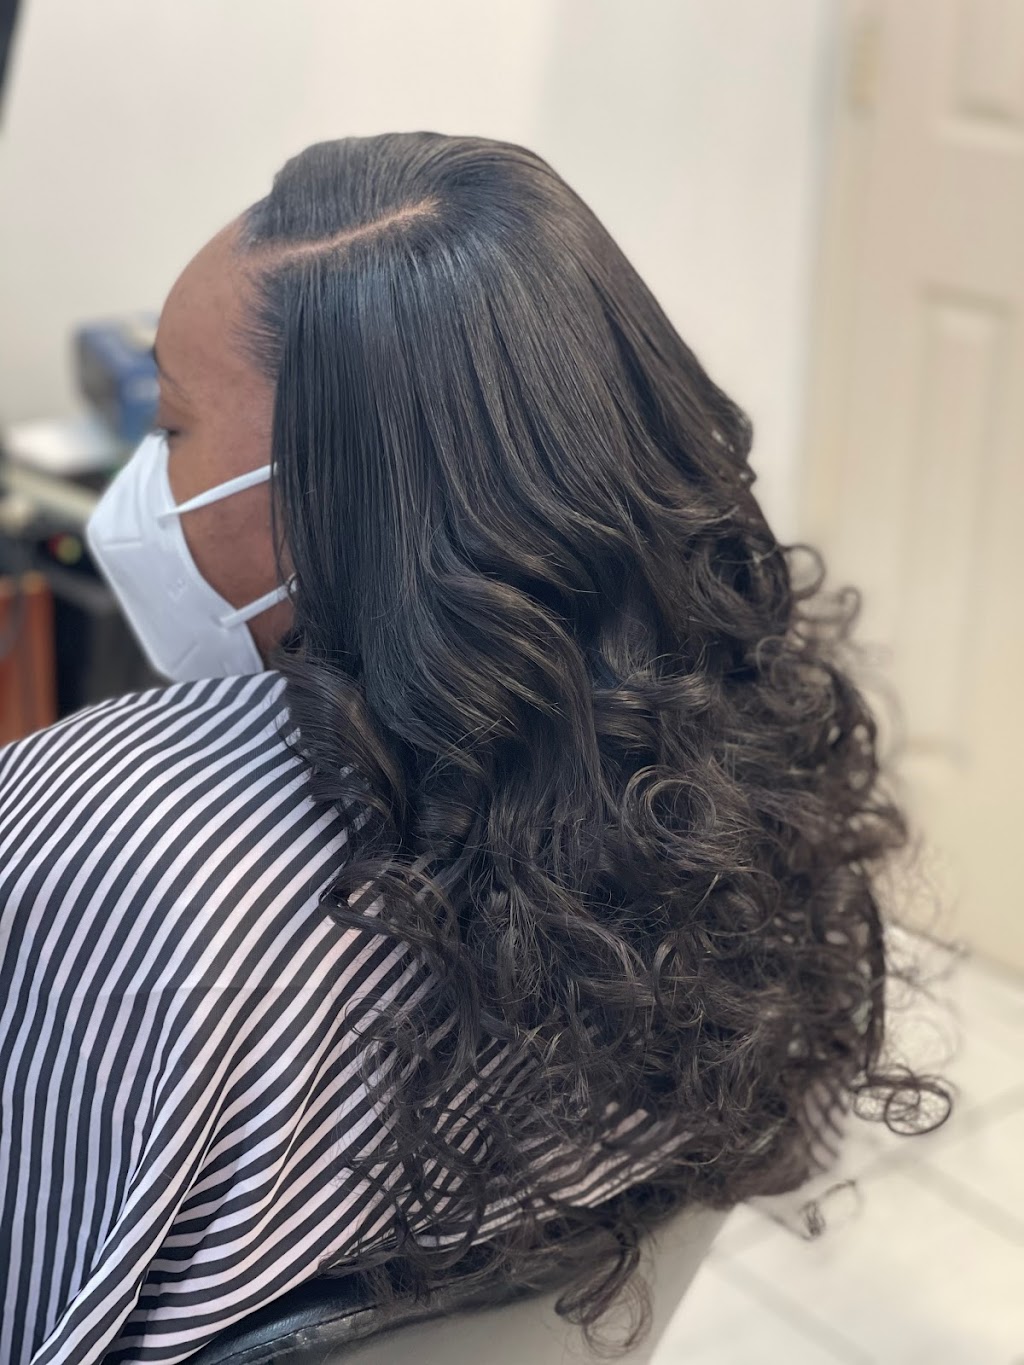 Trini Above The Rest Inc | 401 Crescent St., Brooklyn, NY 11208 | Phone: (908) 365-0626